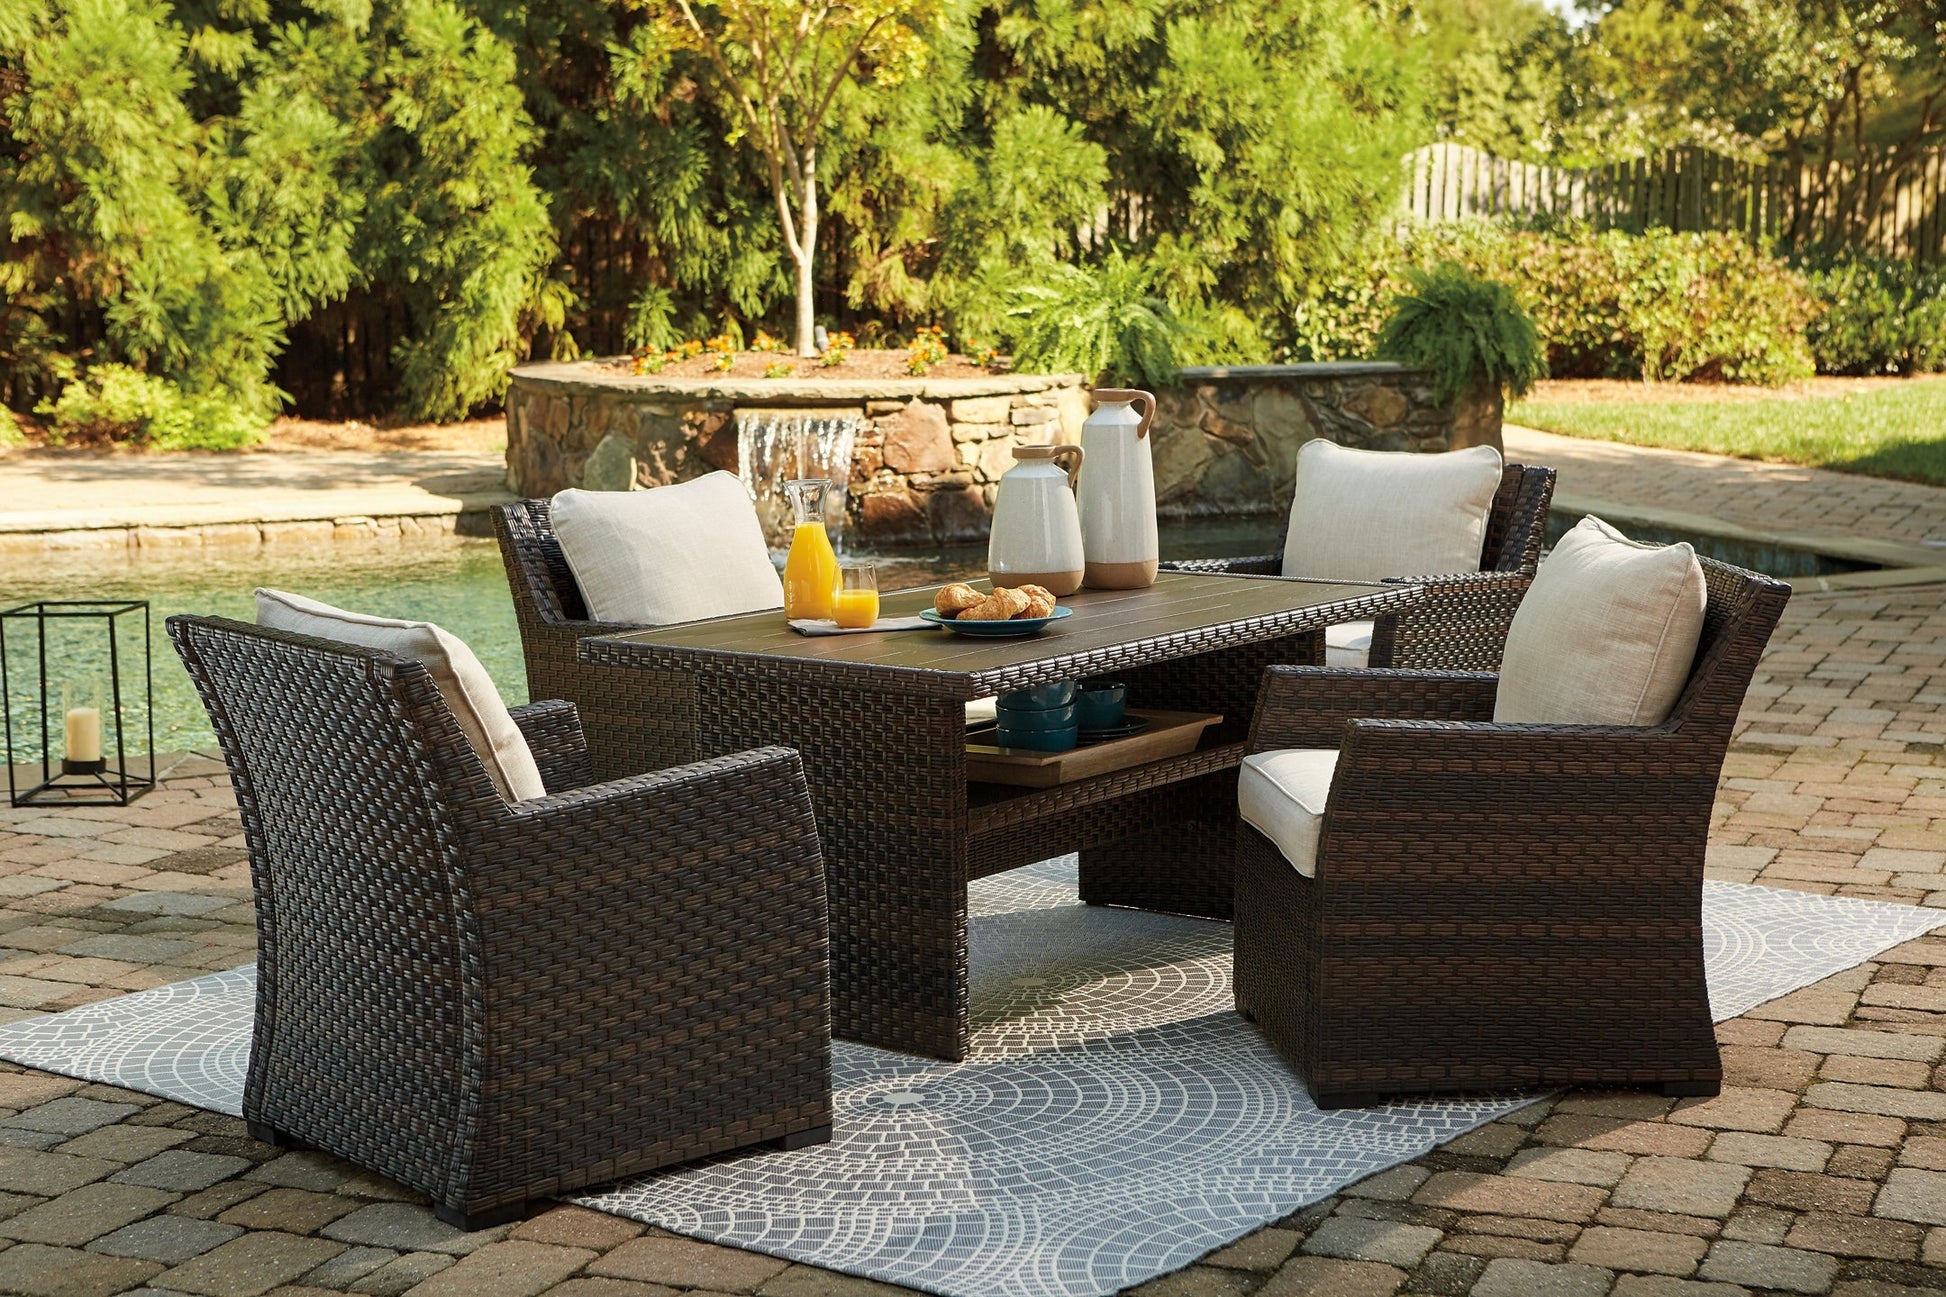 Easy Isle Outdoor Dining Table and 4 Chairs at Walker Mattress and Furniture Locations in Cedar Park and Belton TX.